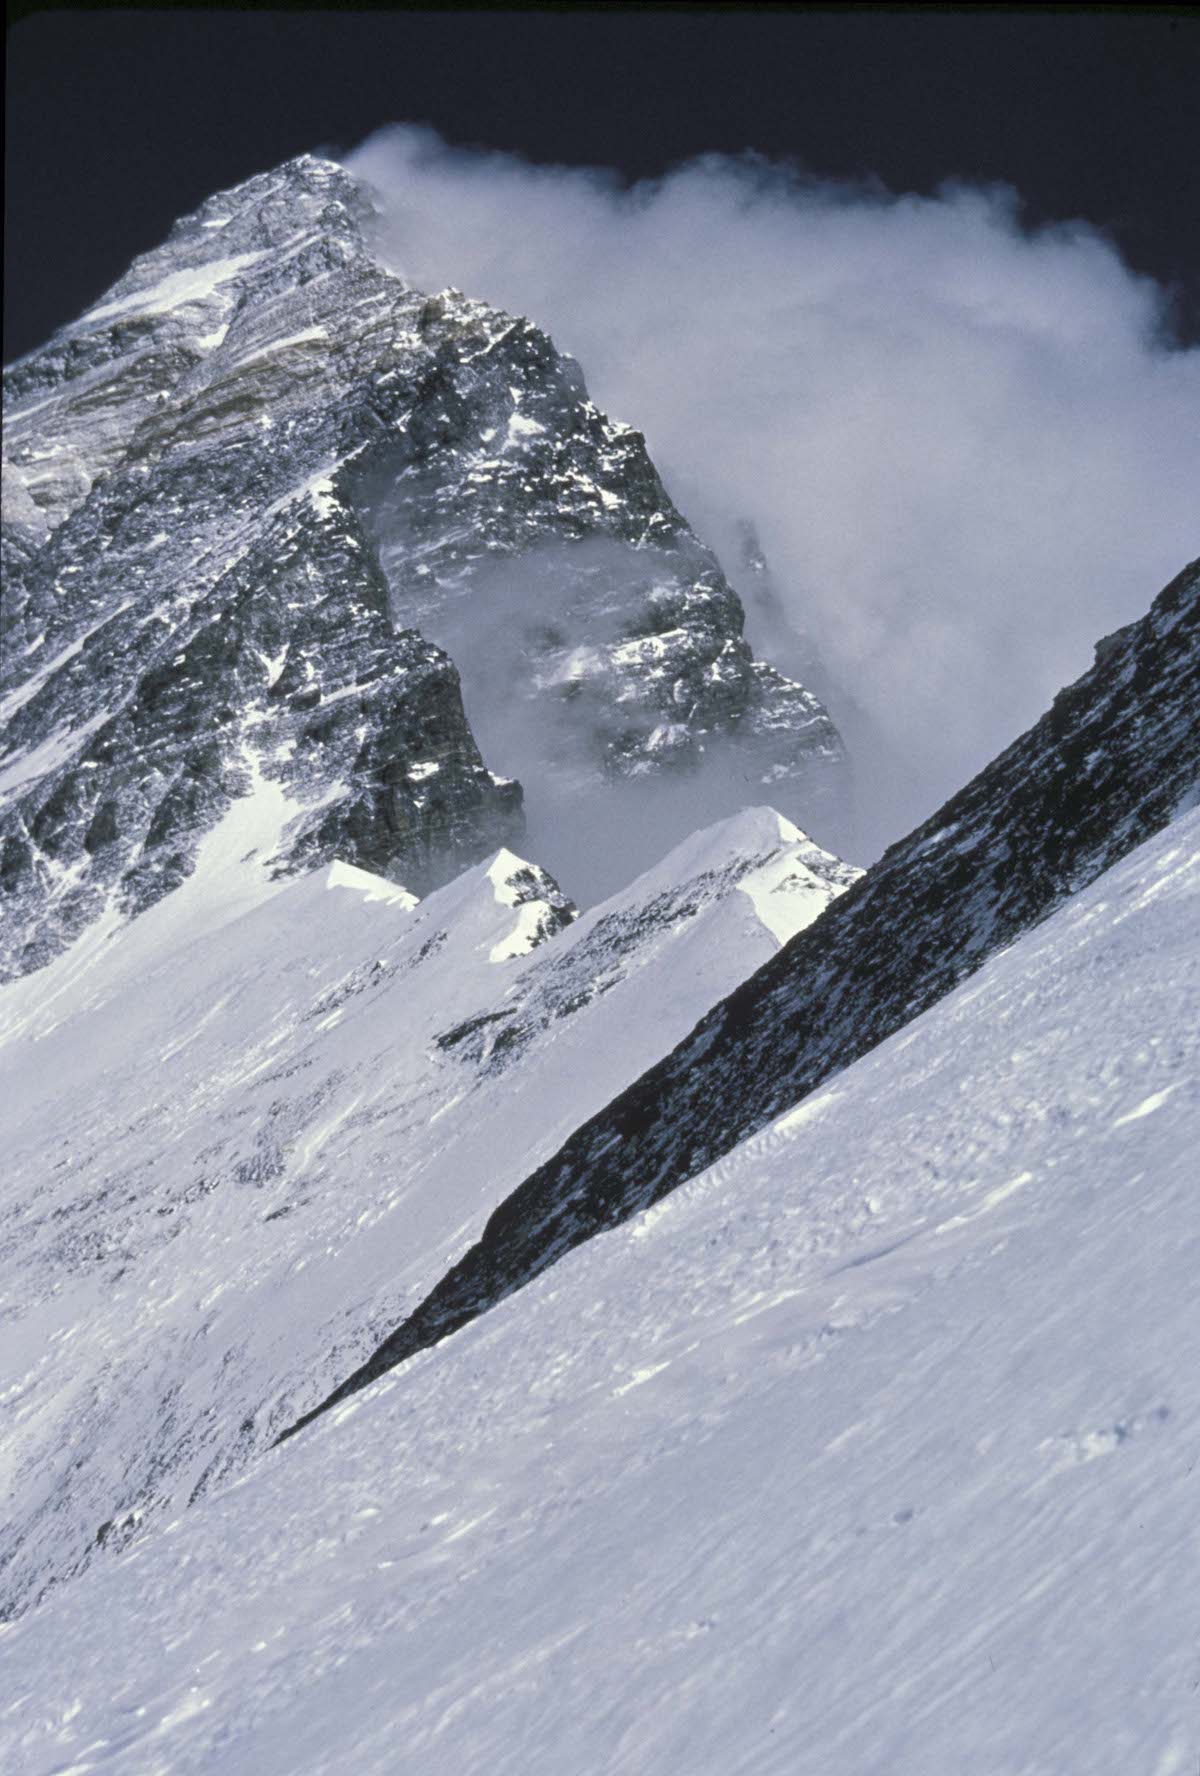 A view from around 7,200 meters shows the 1.5-kilometer stretch of ridge to reach Camp V at the base of Chomolungma’s (Everest’s) upper pyramid. [Photo] Jim Elzinga, courtesy of Mountaineers Books